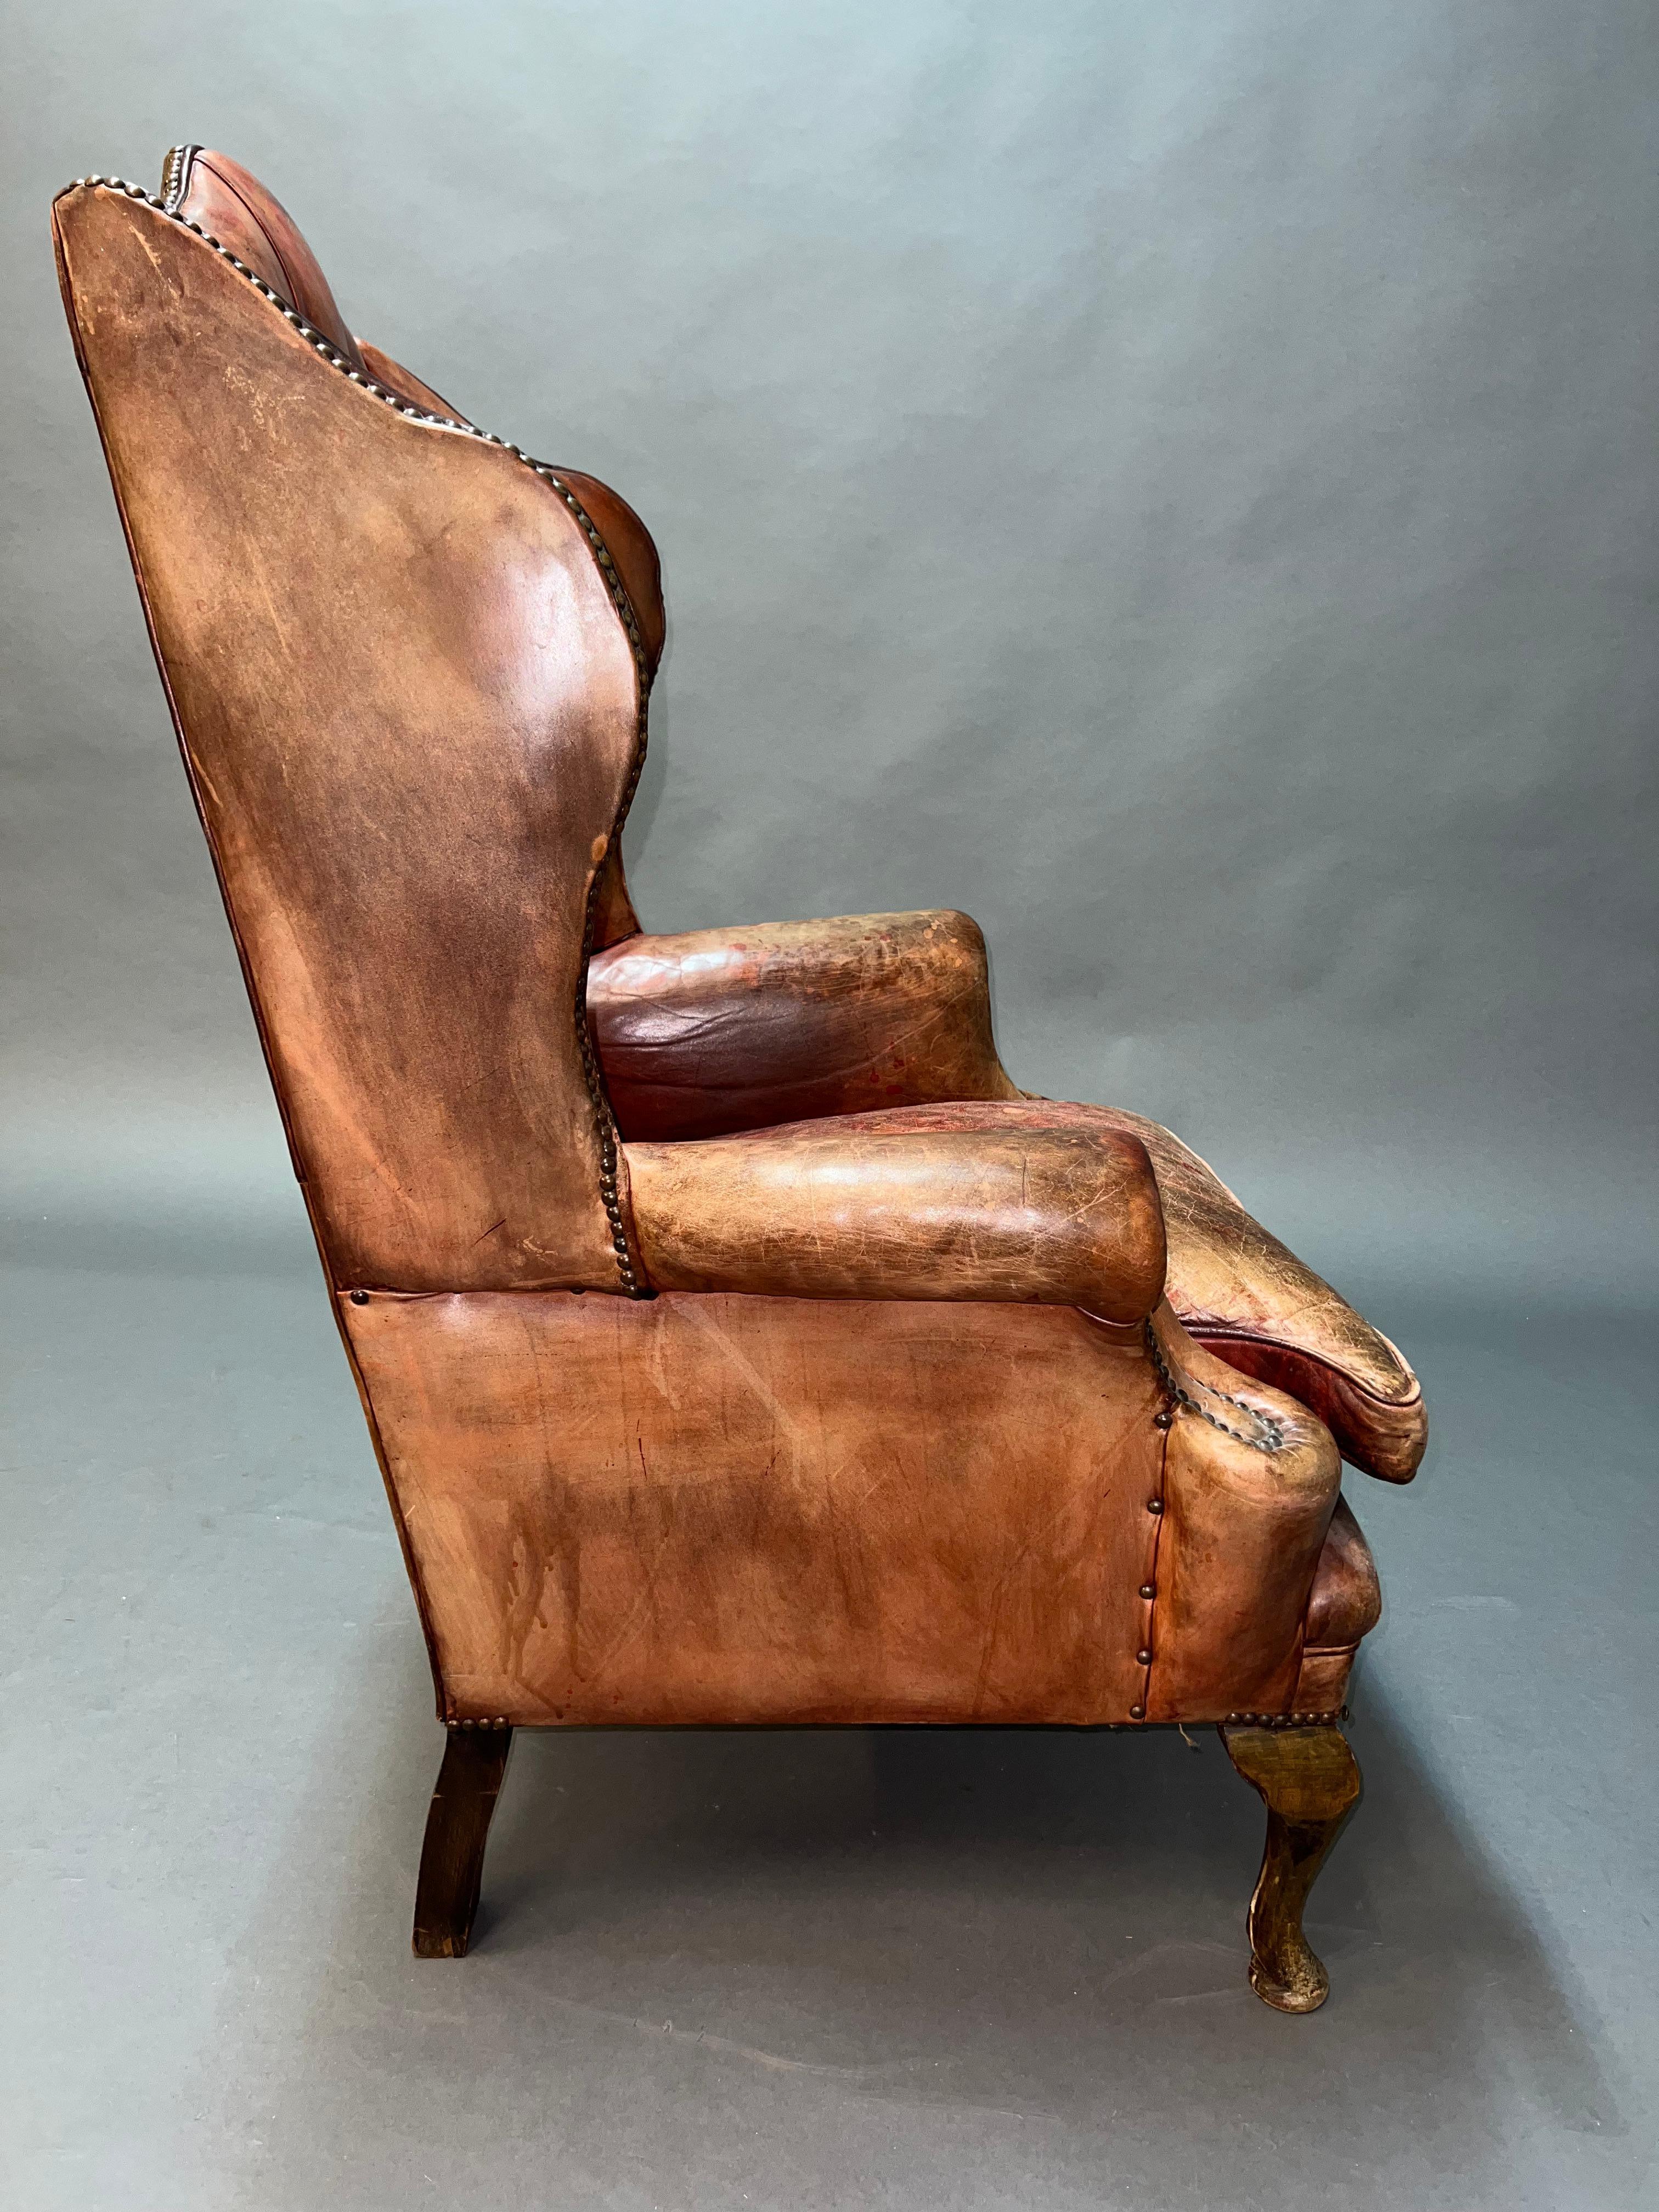 Vintage Brown Leather Tufted Chesterfield Wingback Armchair Original, circa 1880 For Sale 6